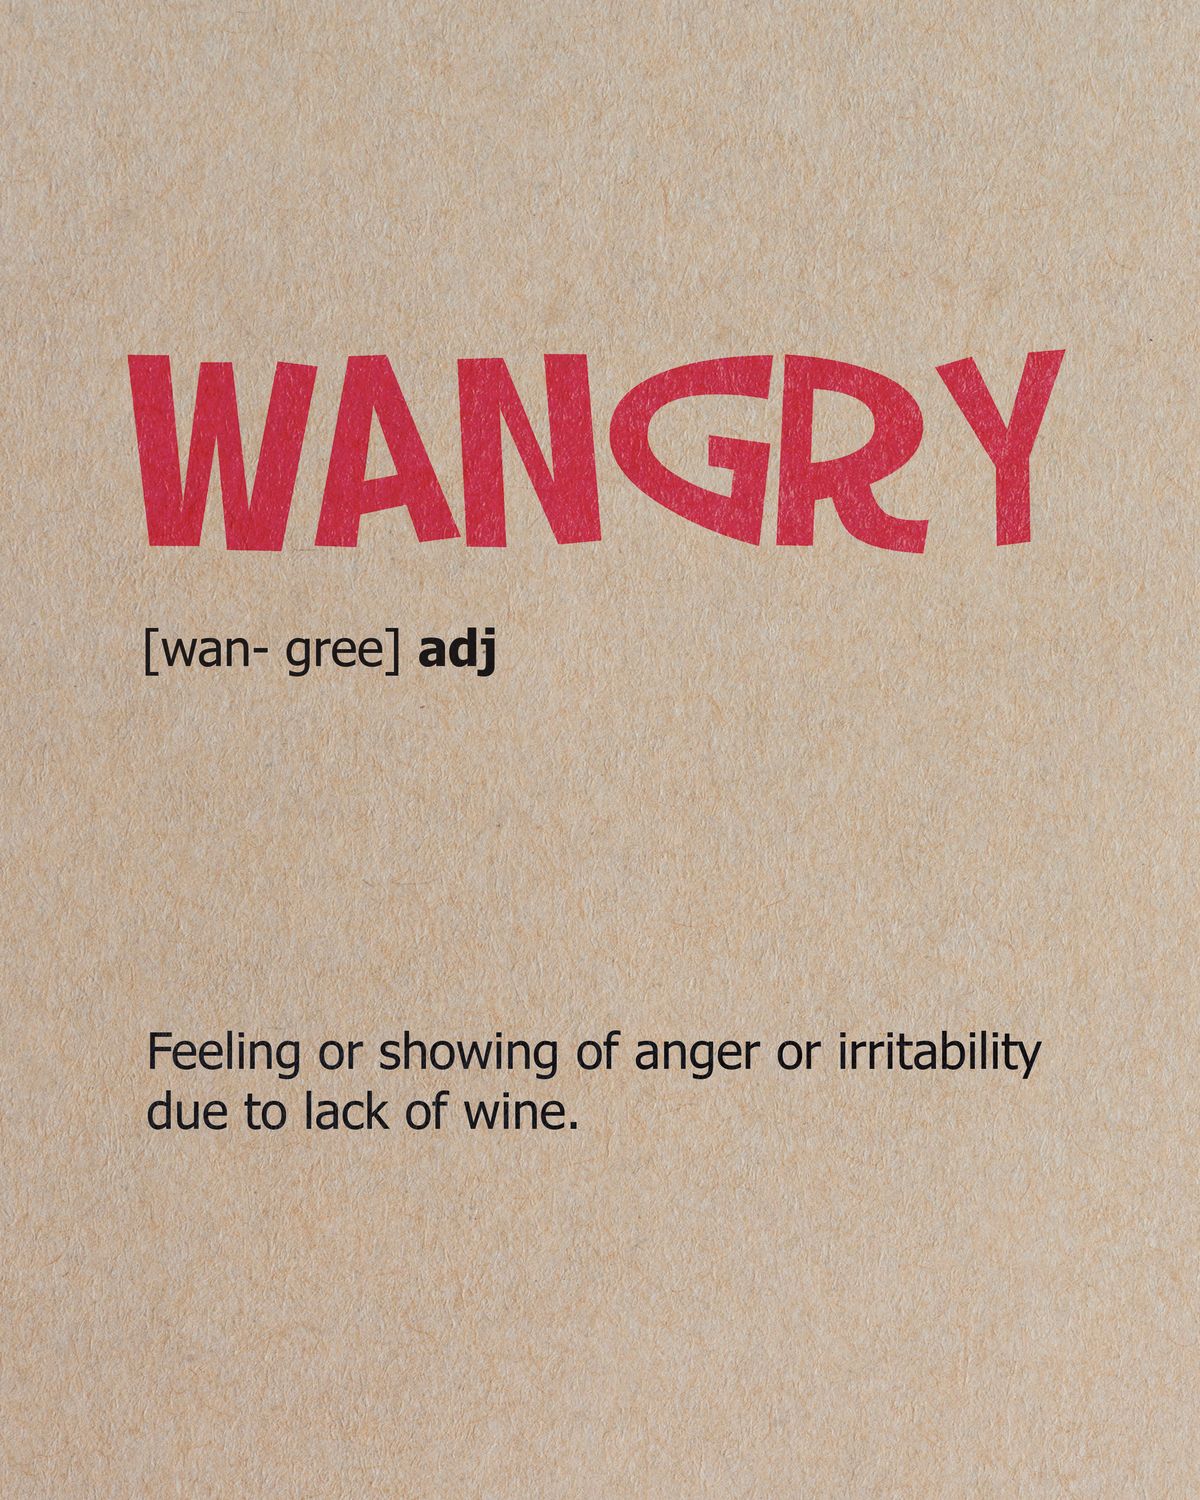 Wangry Definition